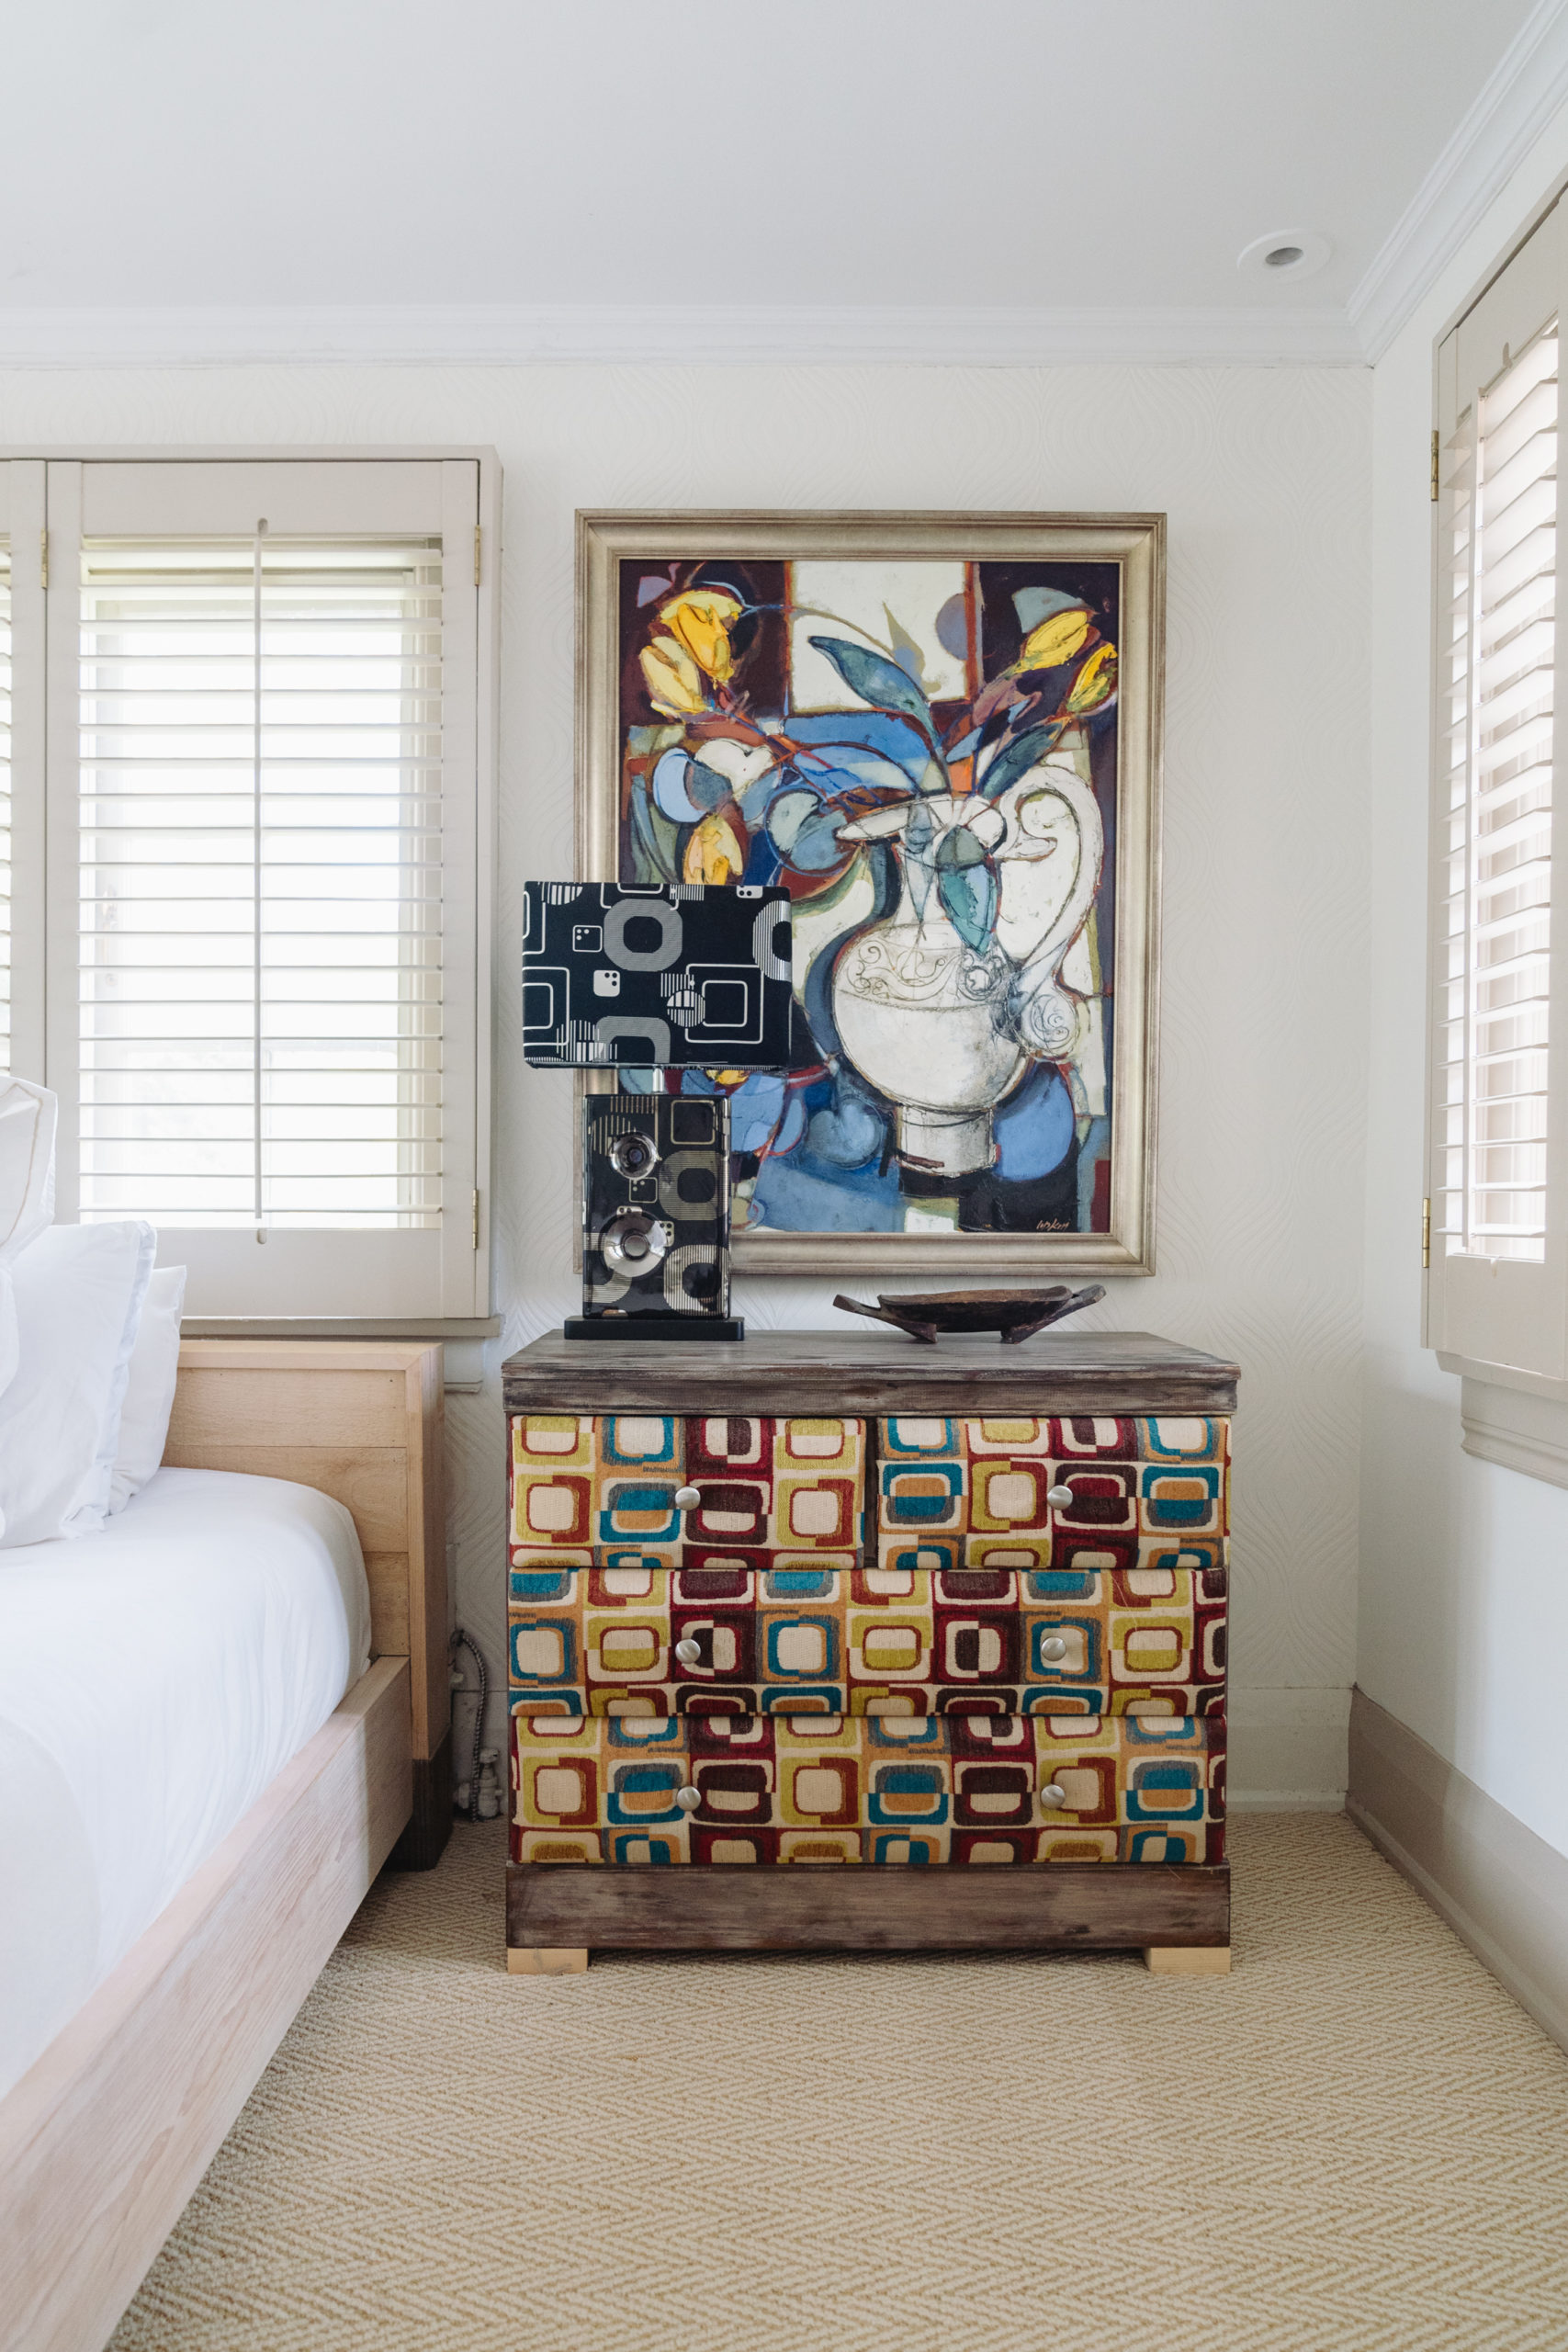 Lipkin stained this old pine dresser and upholstered the front in an earthy fabric. The painting is by Aileen Lipkin, who was a prominent South African artist.